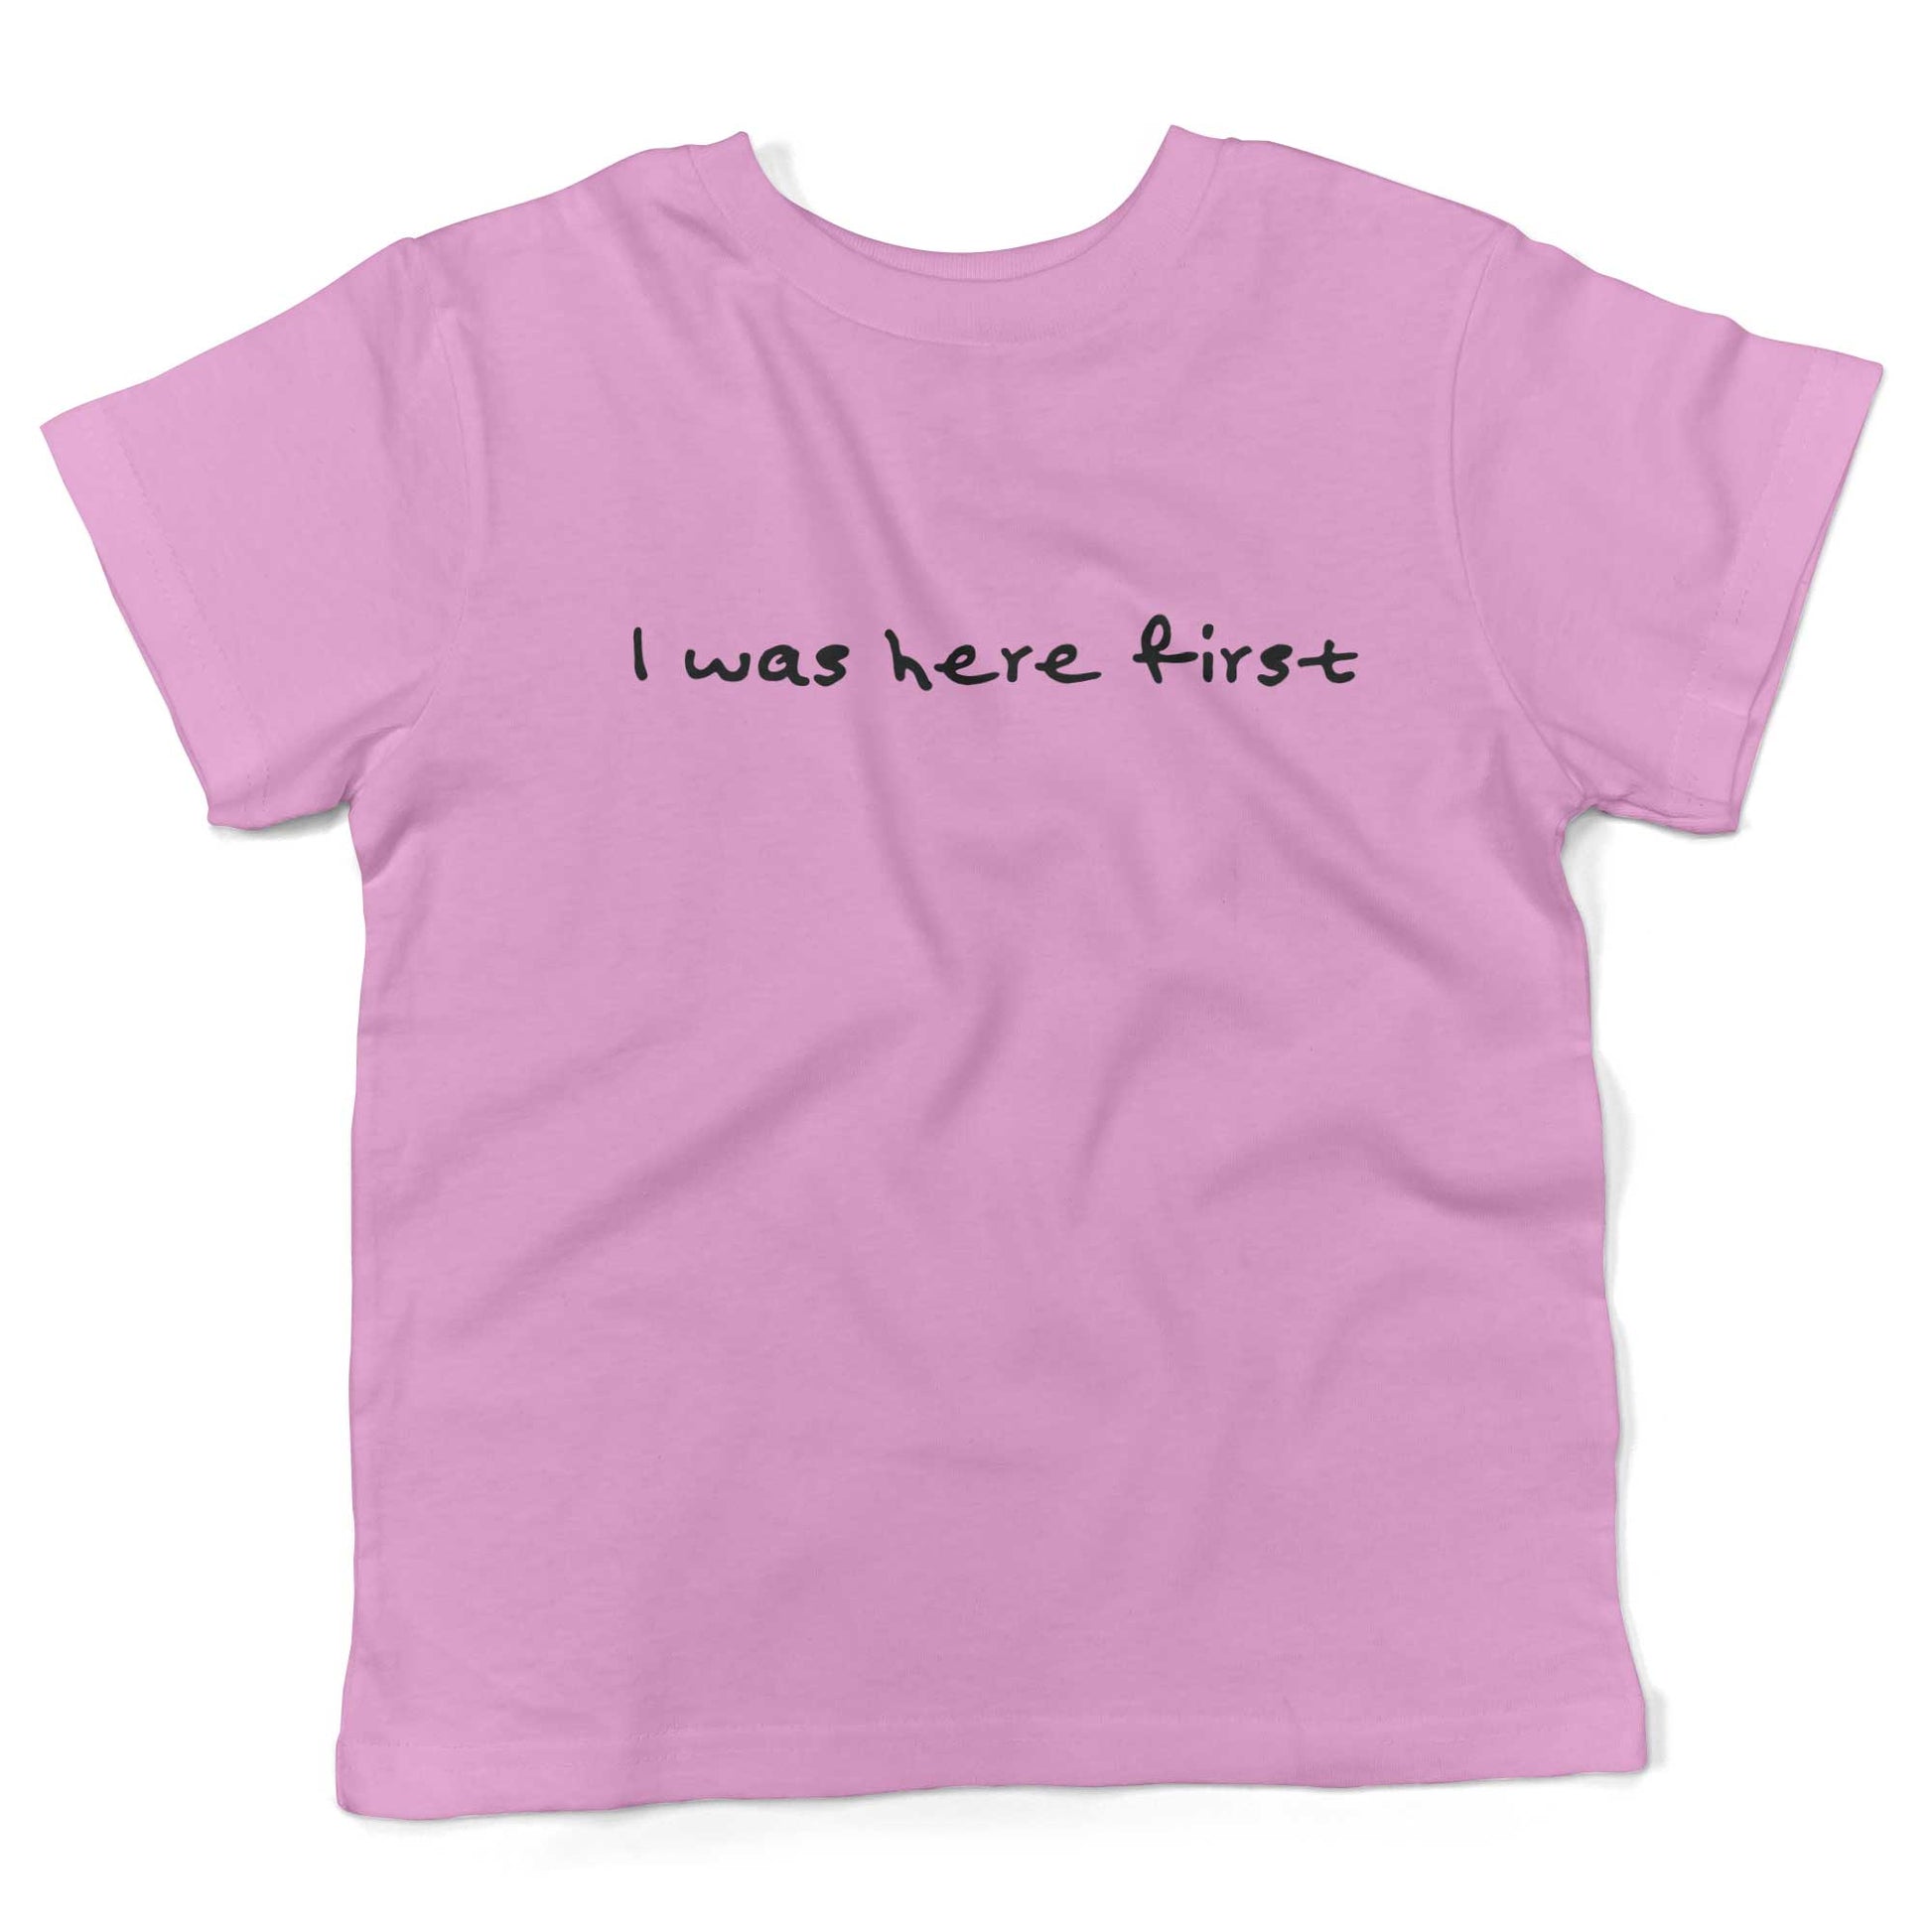 I Was Here First Toddler Shirt-Organic Pink-2T